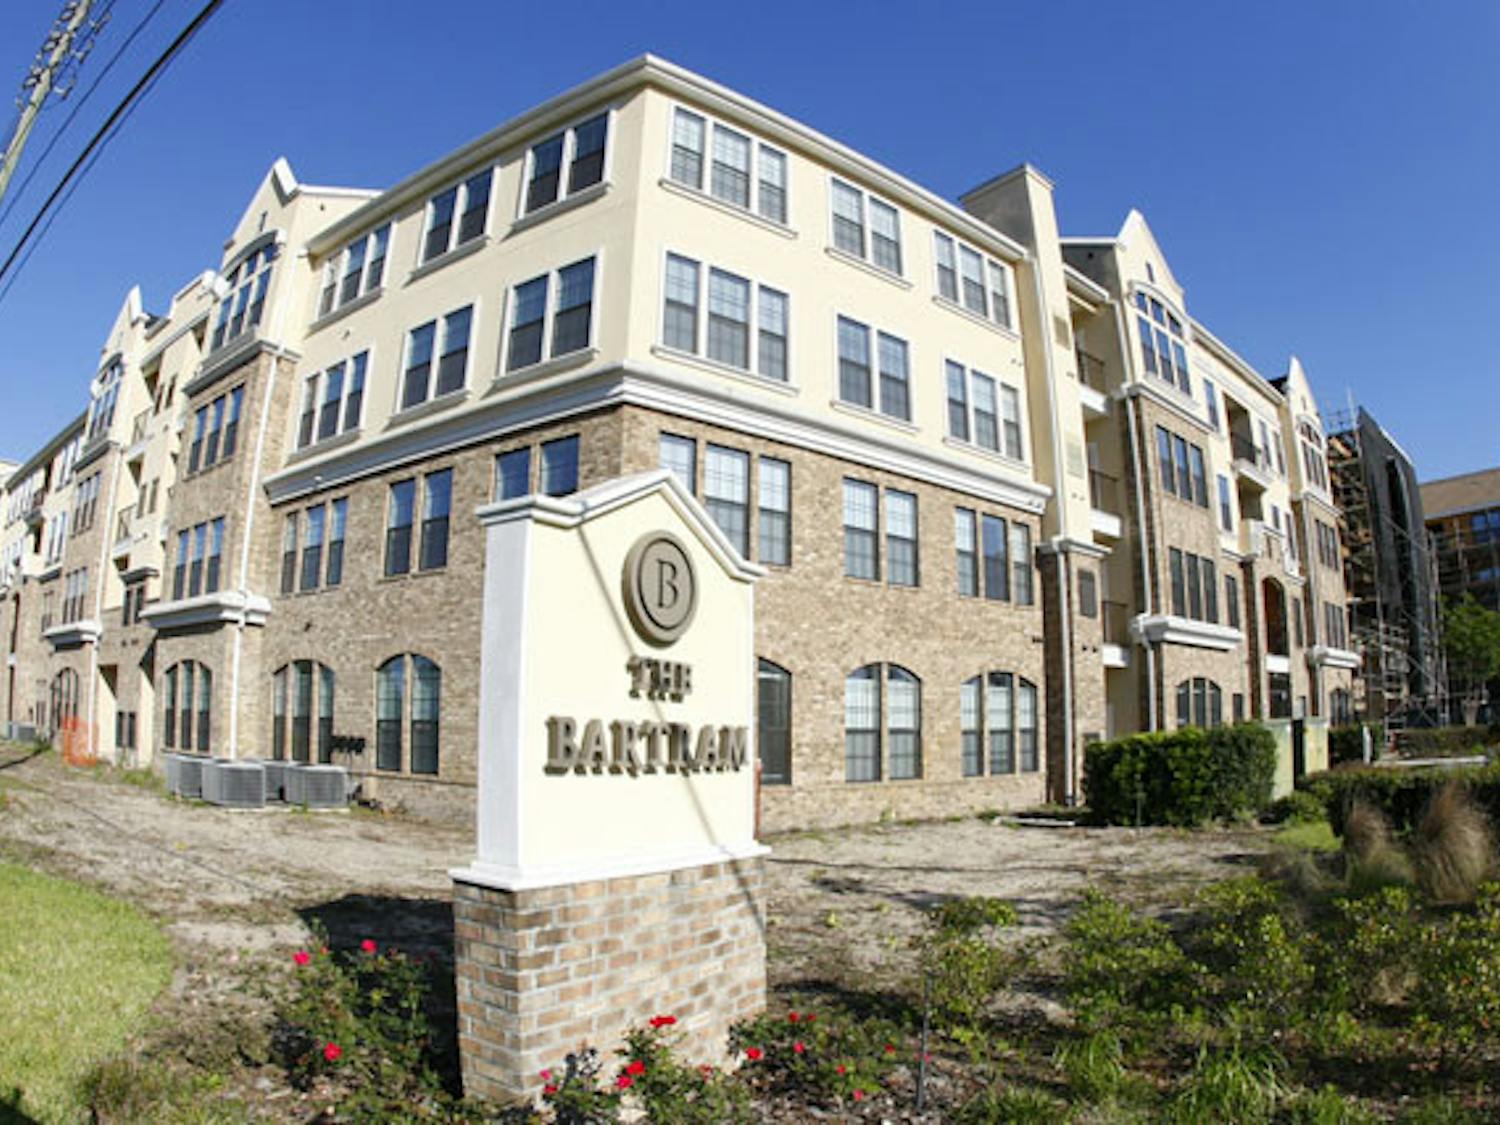 The Bartram apartments, located at 2337 SW Archer Road, will reopen in the fall after being closed for a year for repairs.